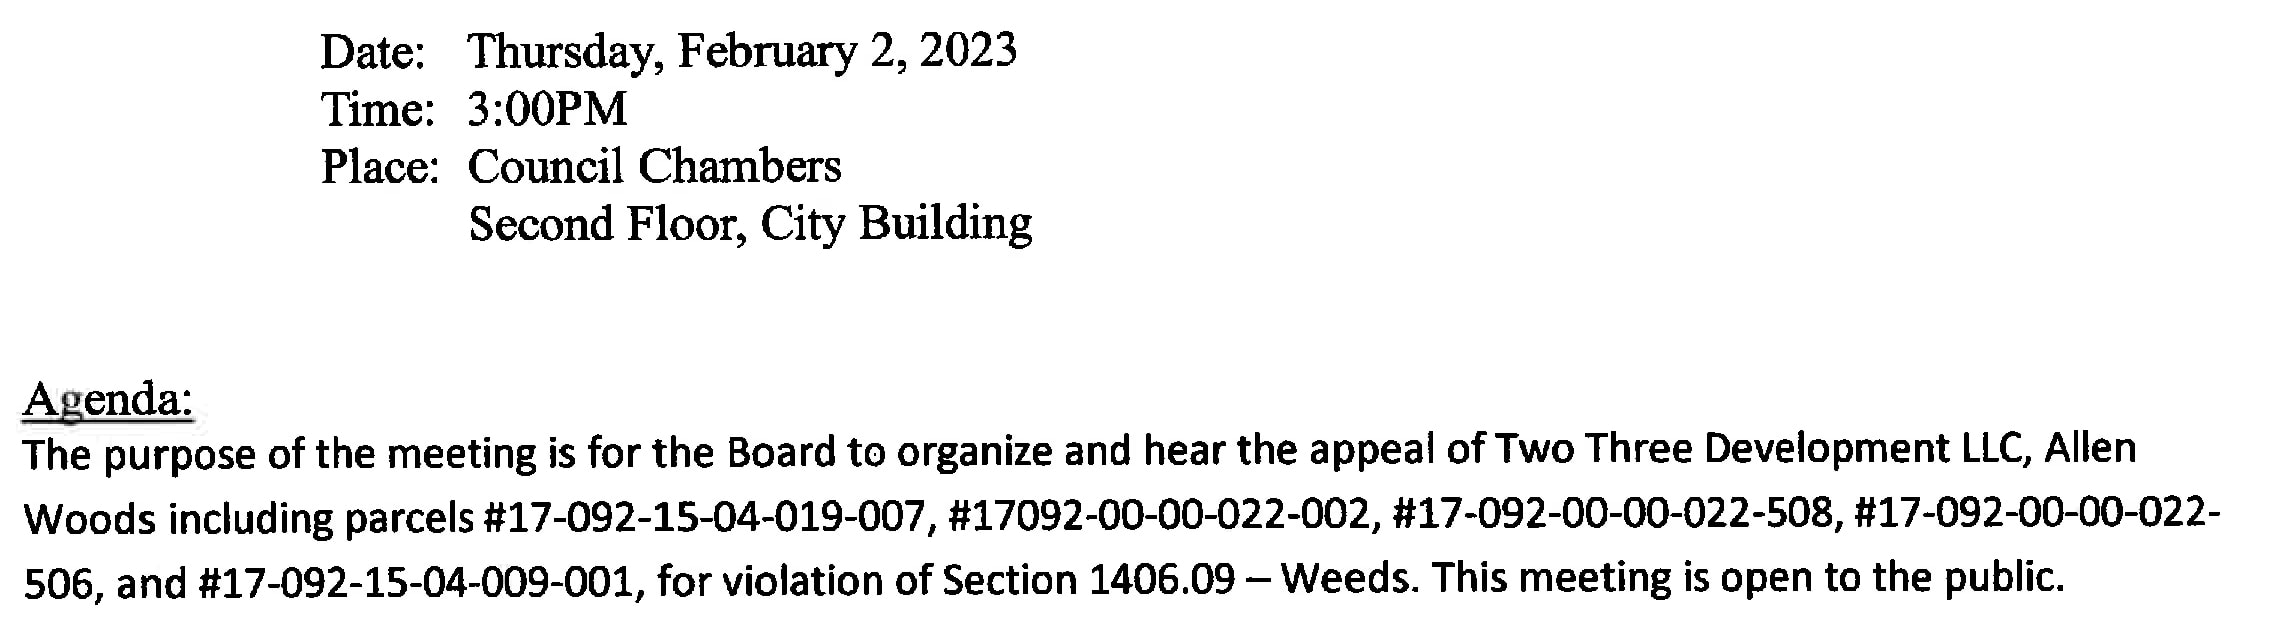 The purpose of the meeting is for the Board to organize and hear the appeal of Two Three Developement LLC, Allen Woods.